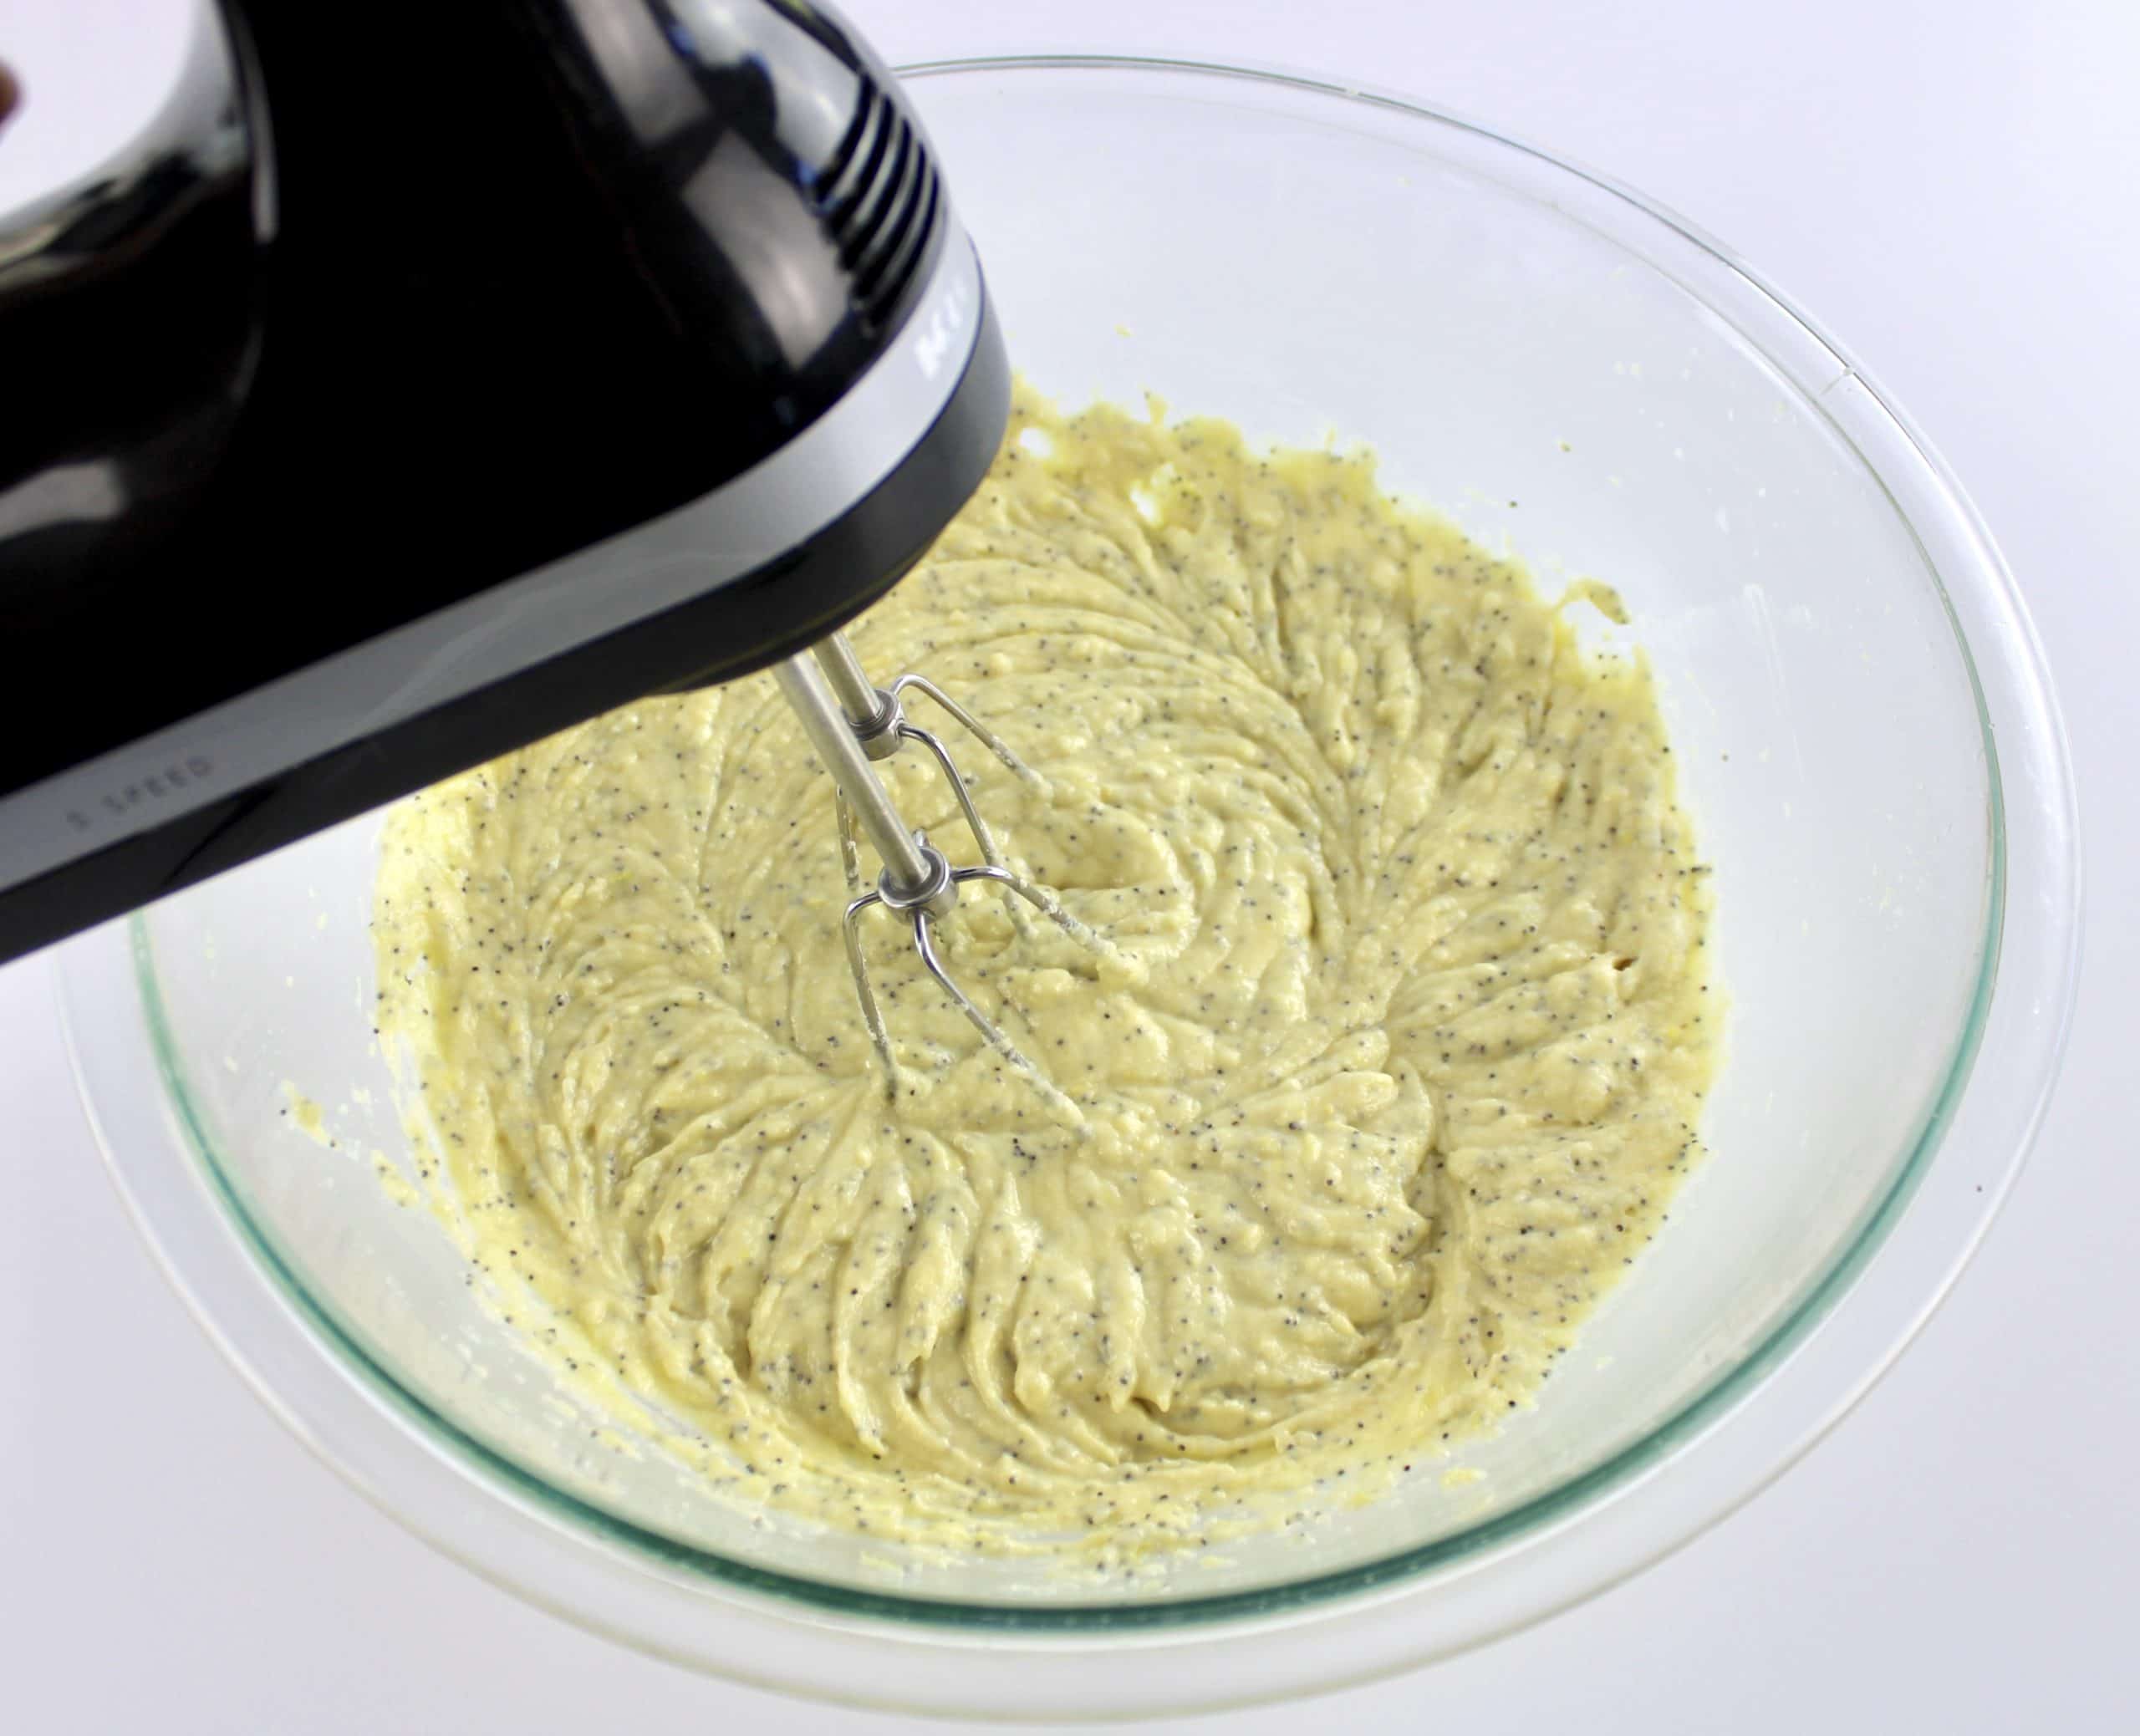 Keto Lemon Poppy Seed Muffins batter in glass bowl being mixed